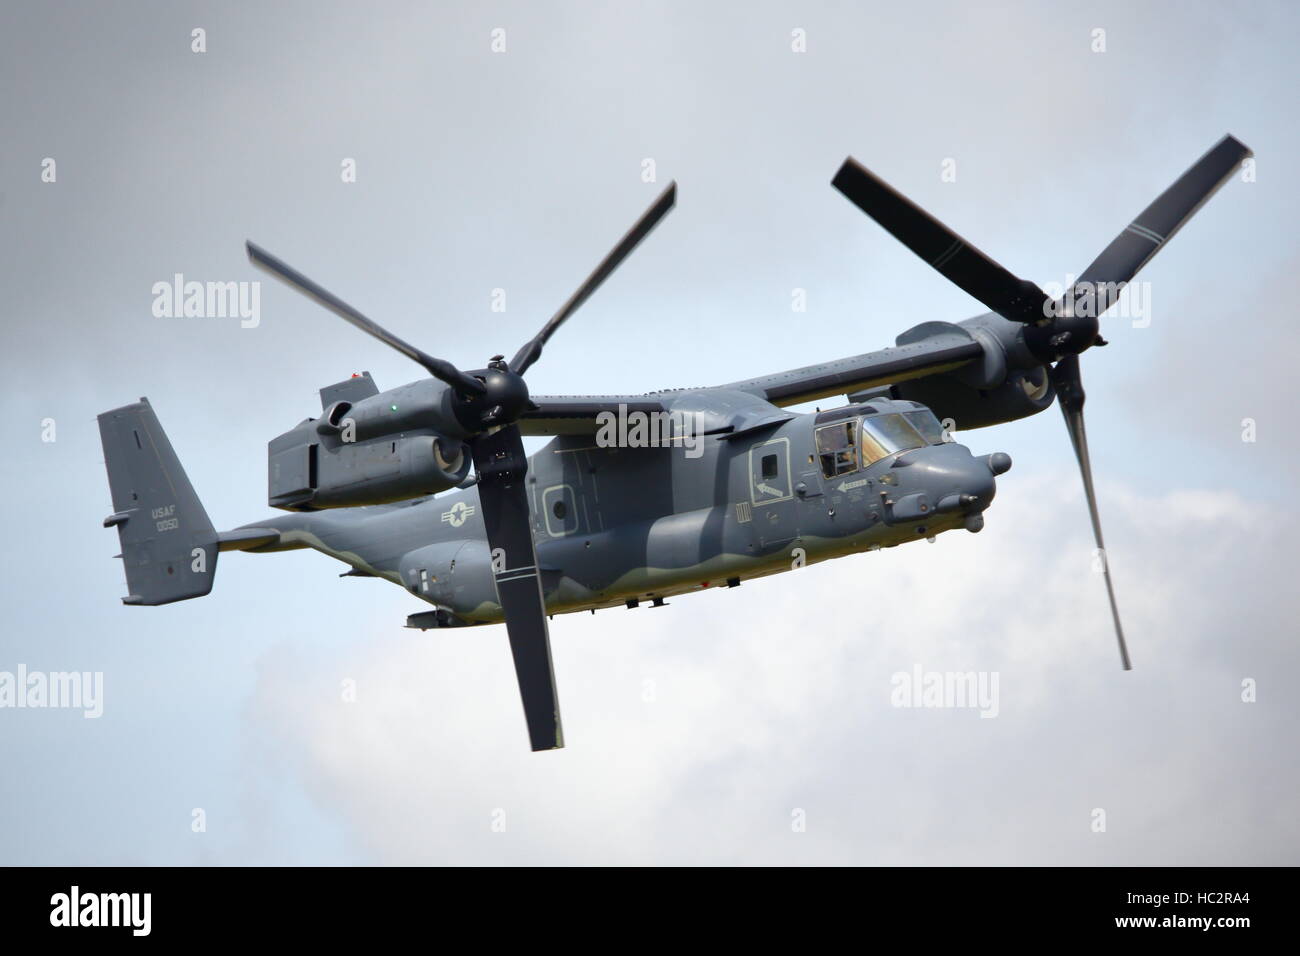 Bell Boeing V-22 Osprey tilt rotor military aircraft at the RIAT 2015 at Fairford, UK Stock Photo